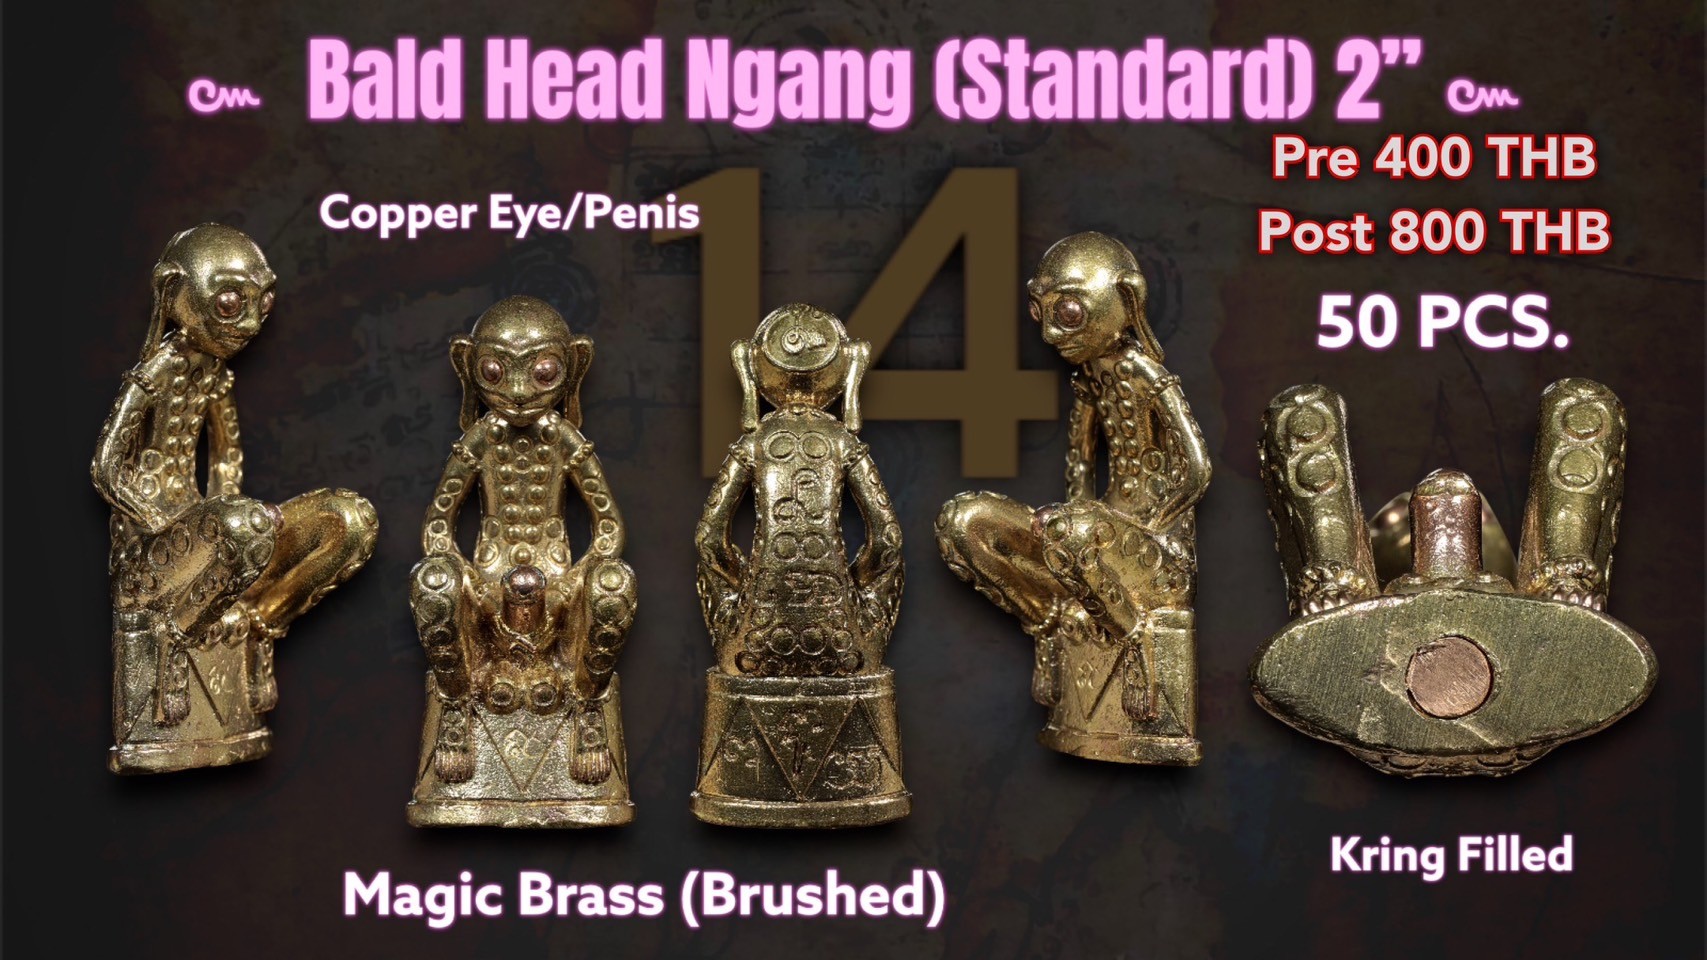 14.Bald Head Ngang Magic Brass (Brushed) 2 inches